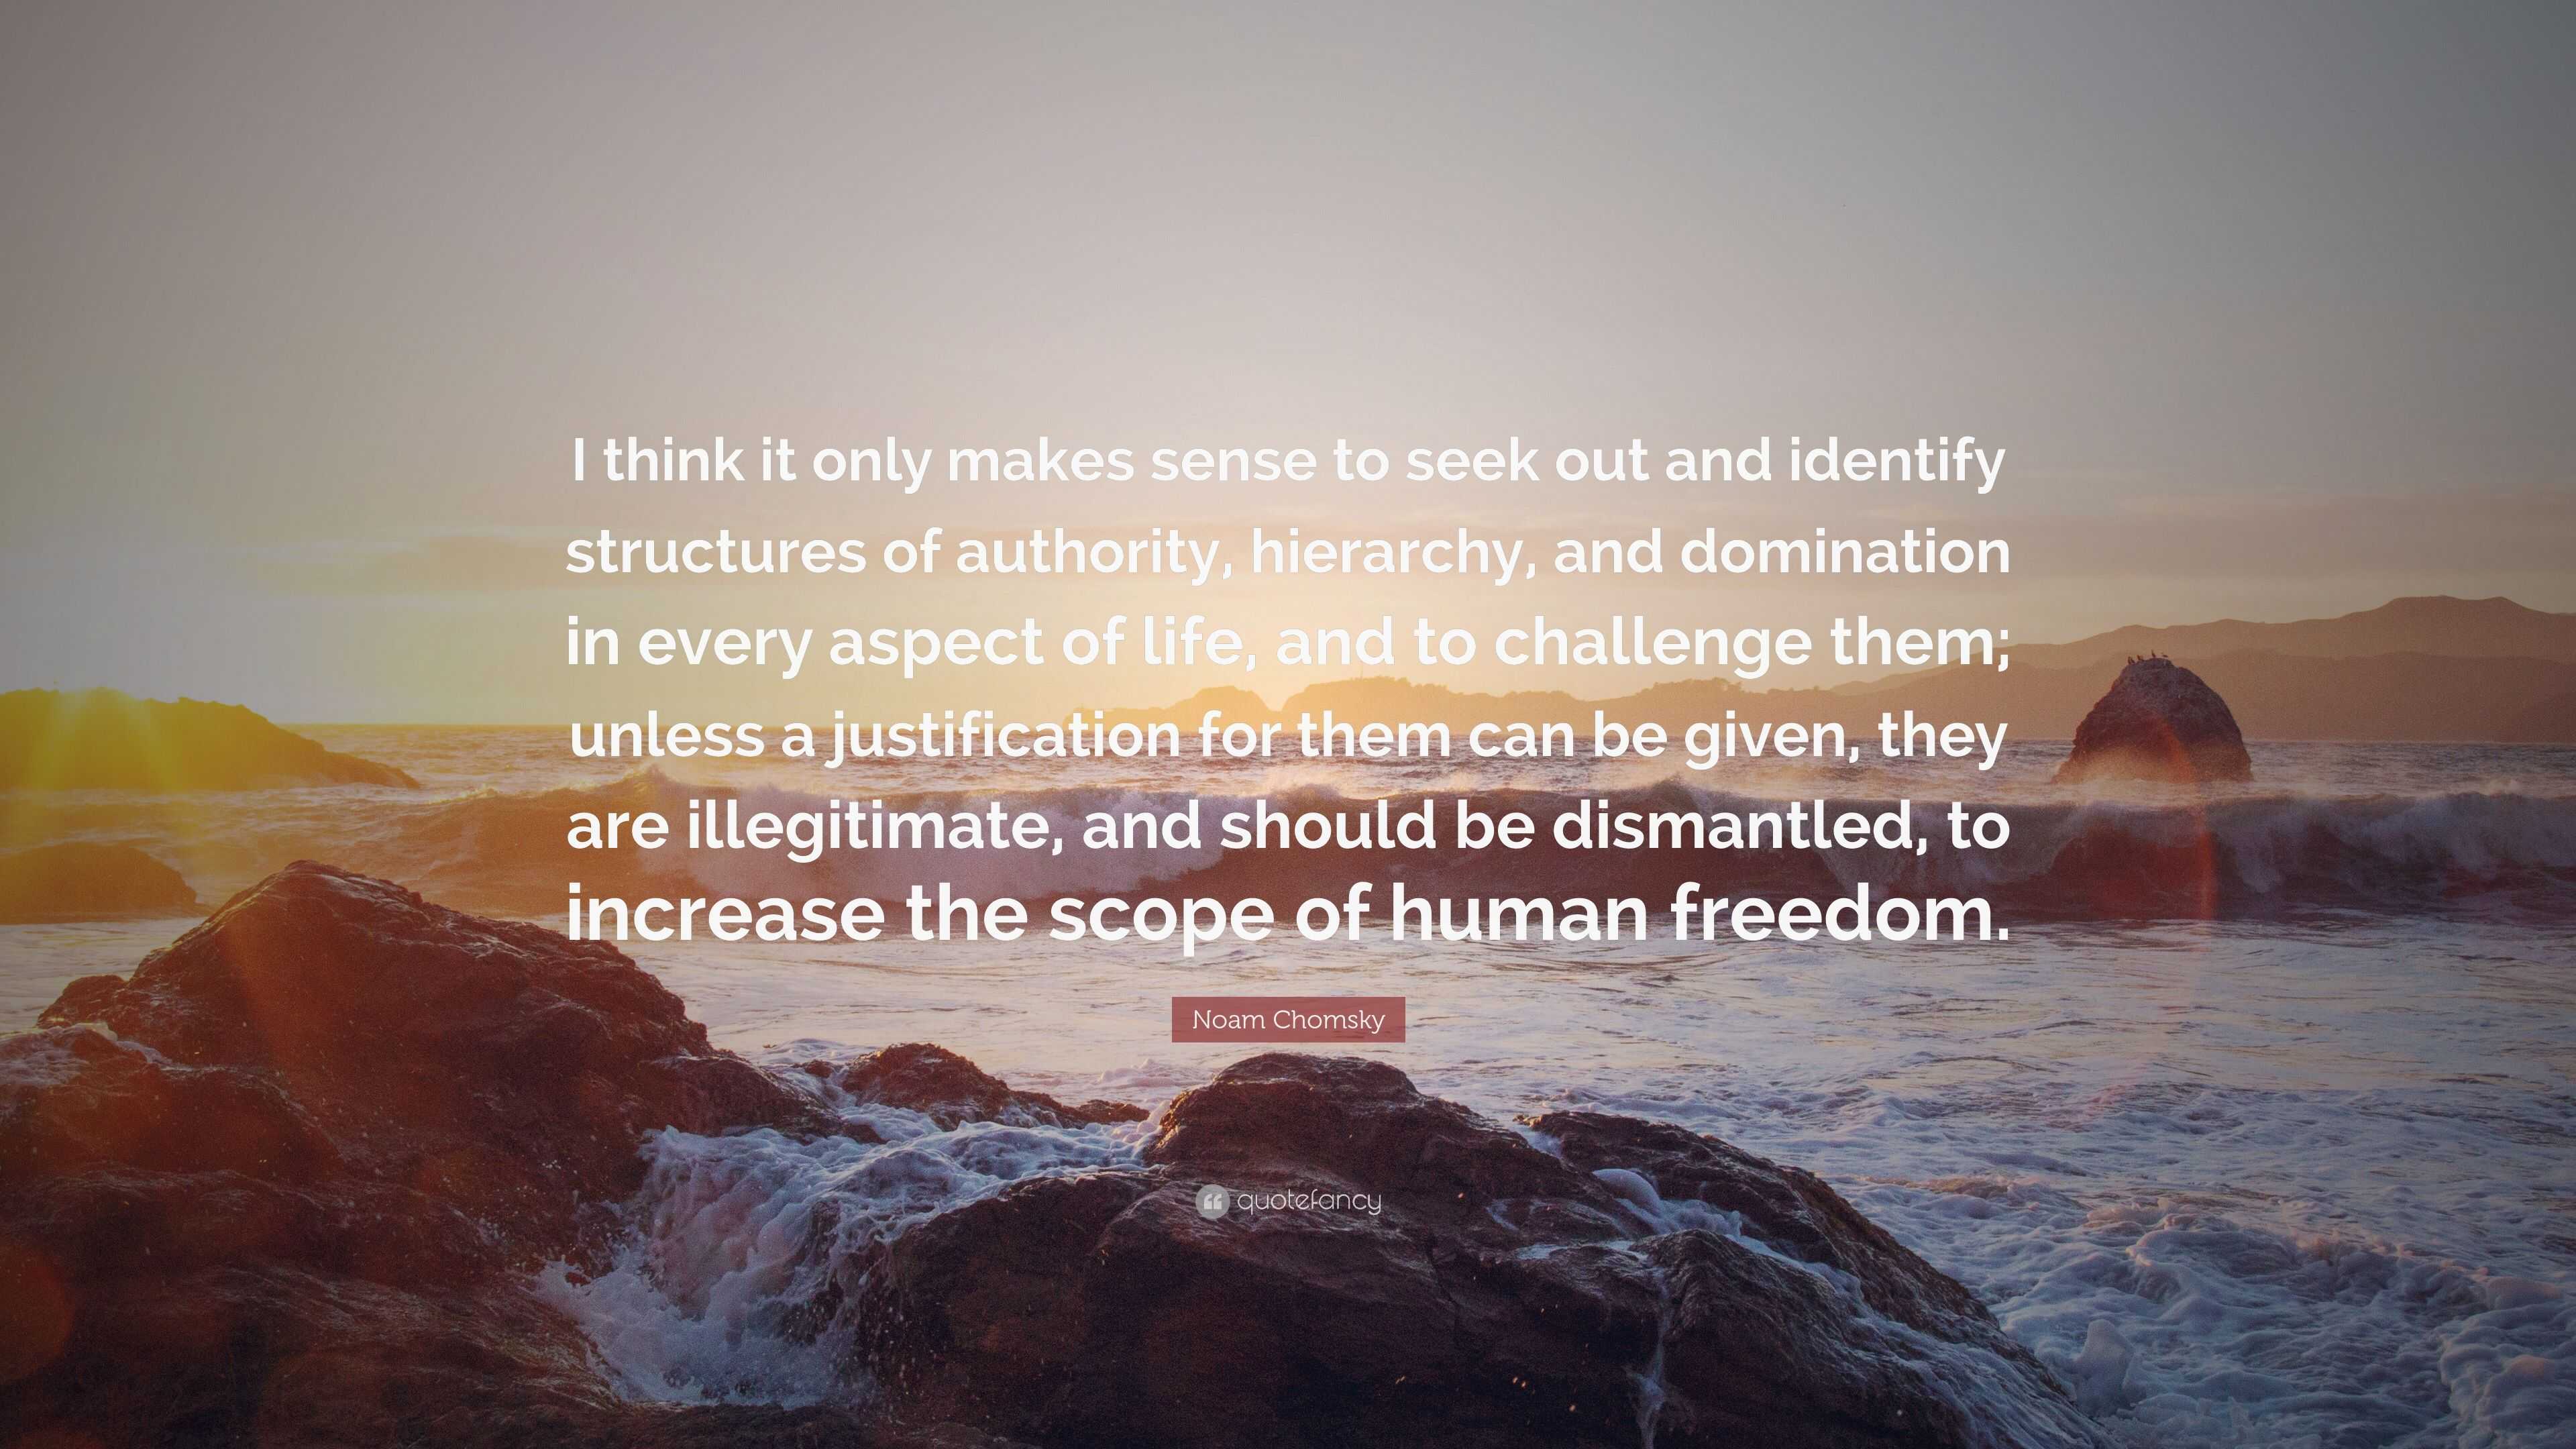 Noam Chomsky Quote: “I think it only makes sense to seek out and ...